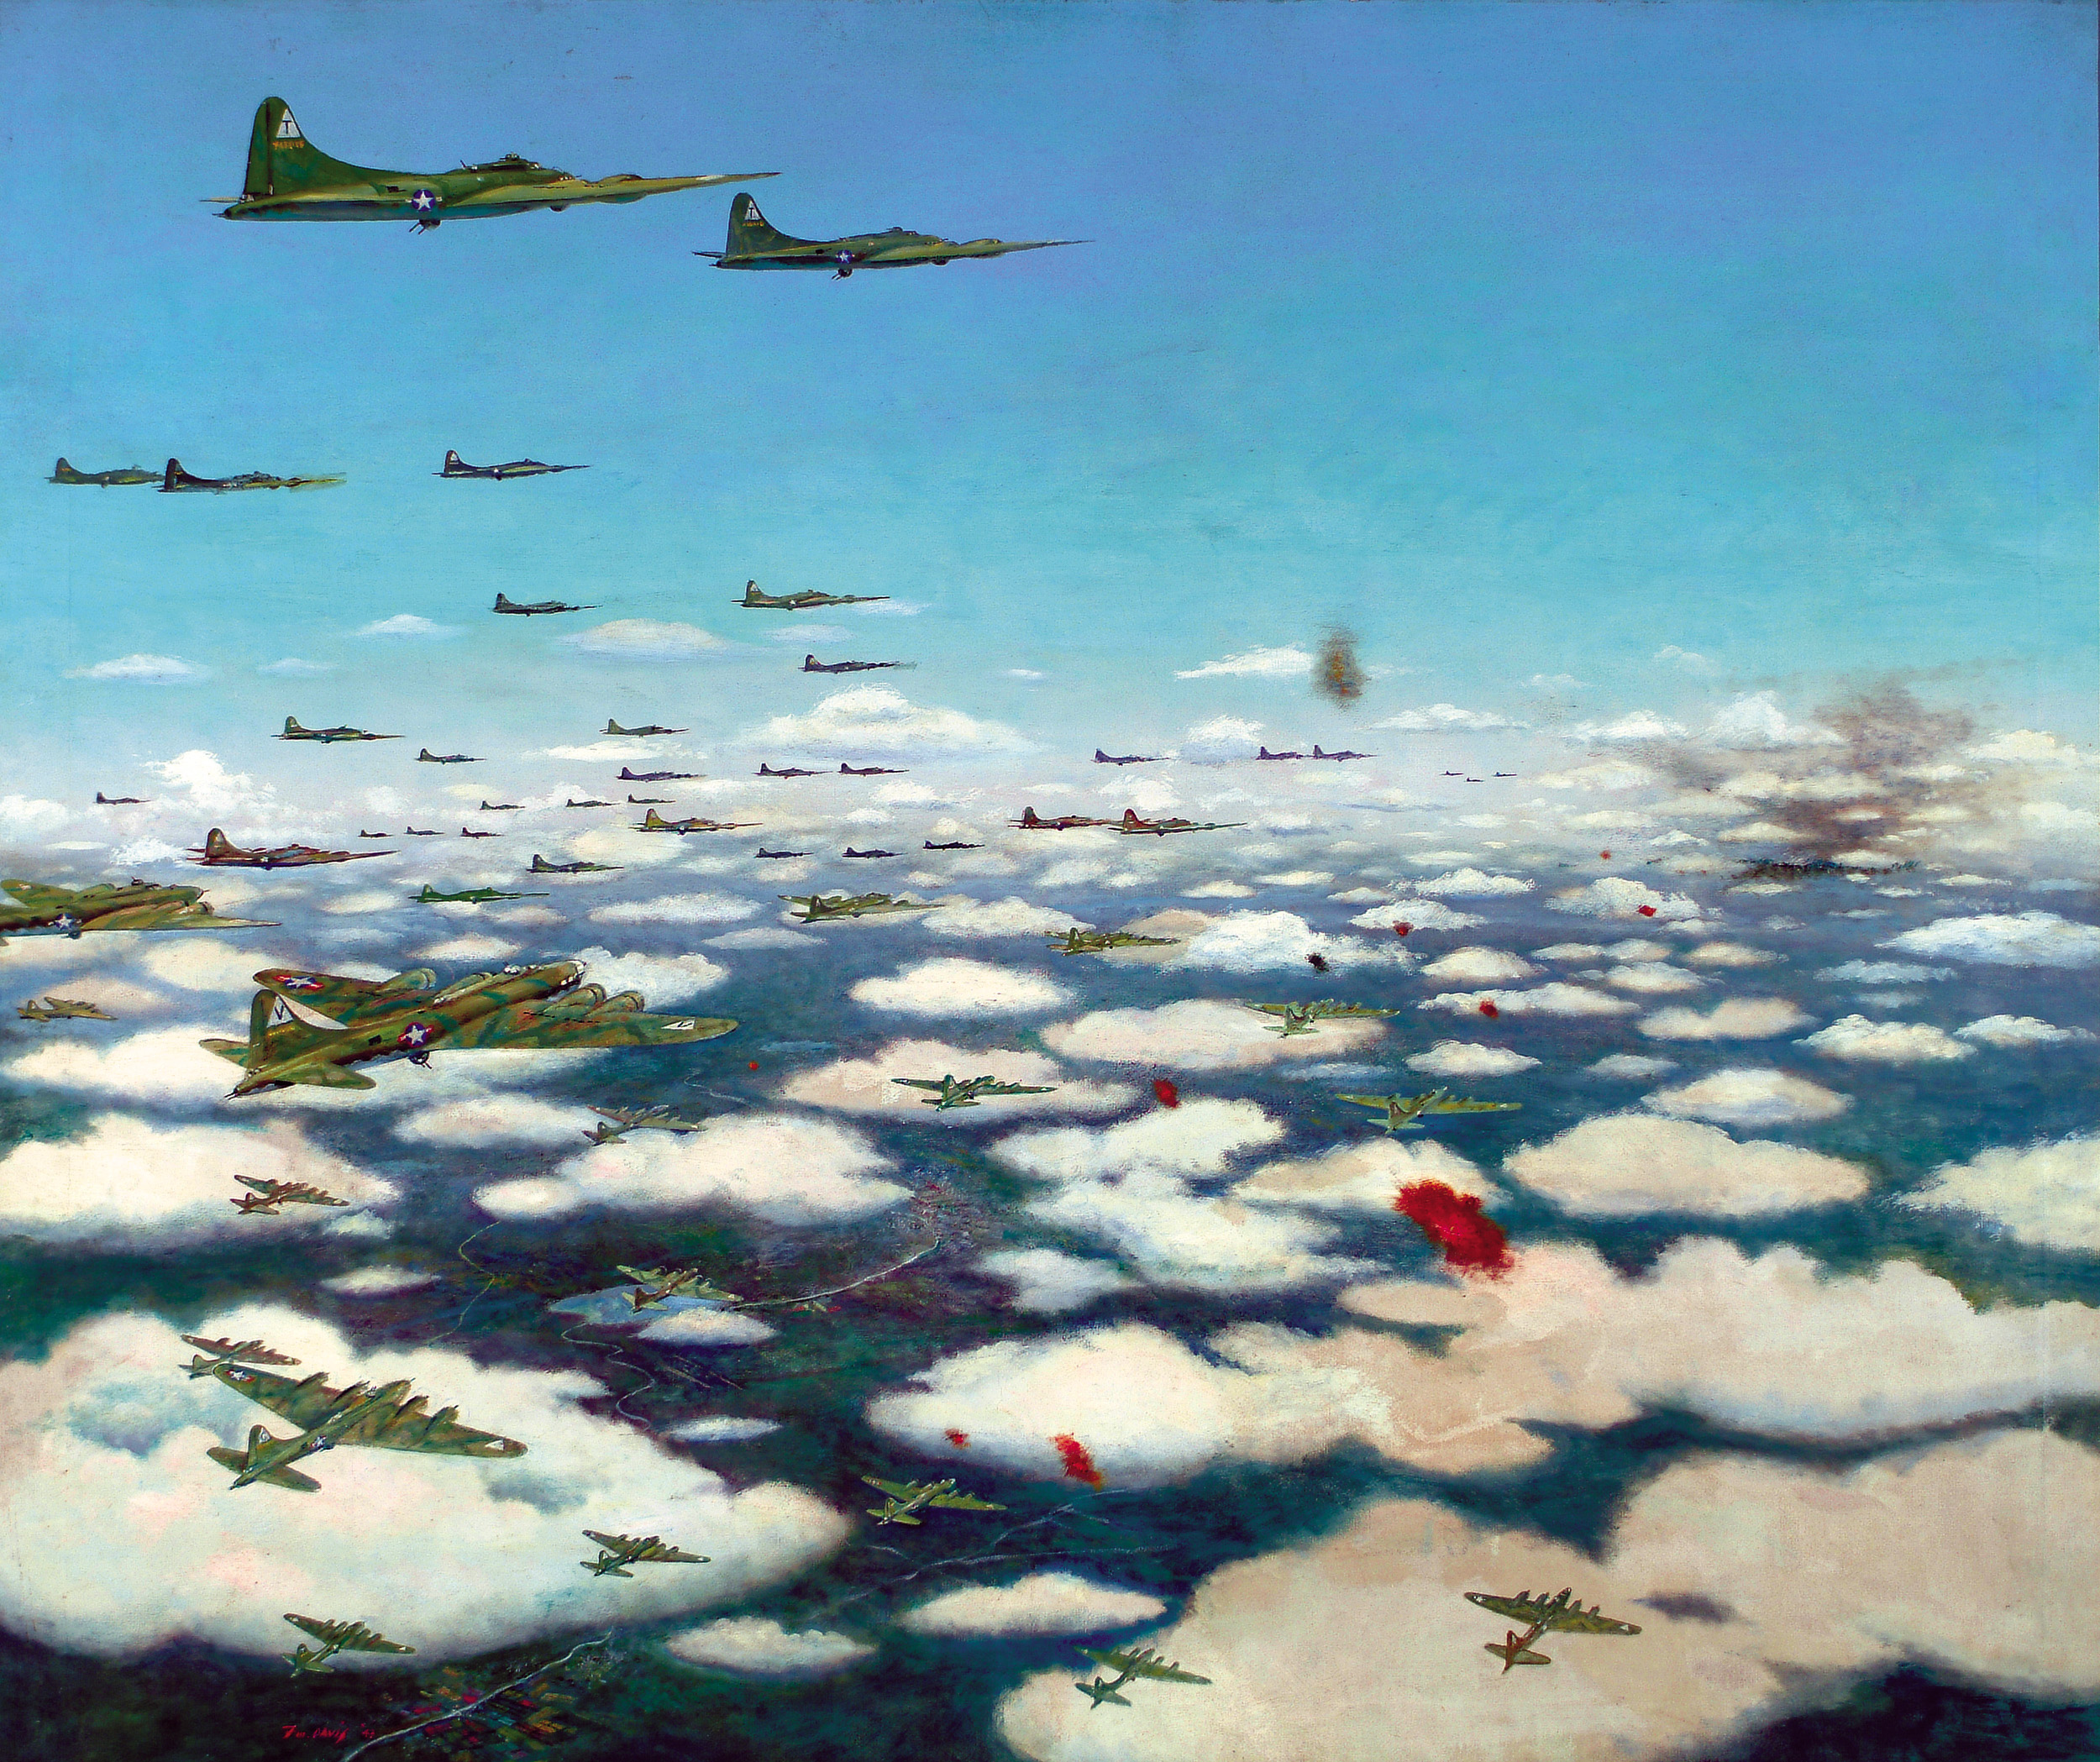 Filling the skies over Germany, U.S. B-17 bombers encounter deadly flak in this WWII period painting by Floyd Davis.